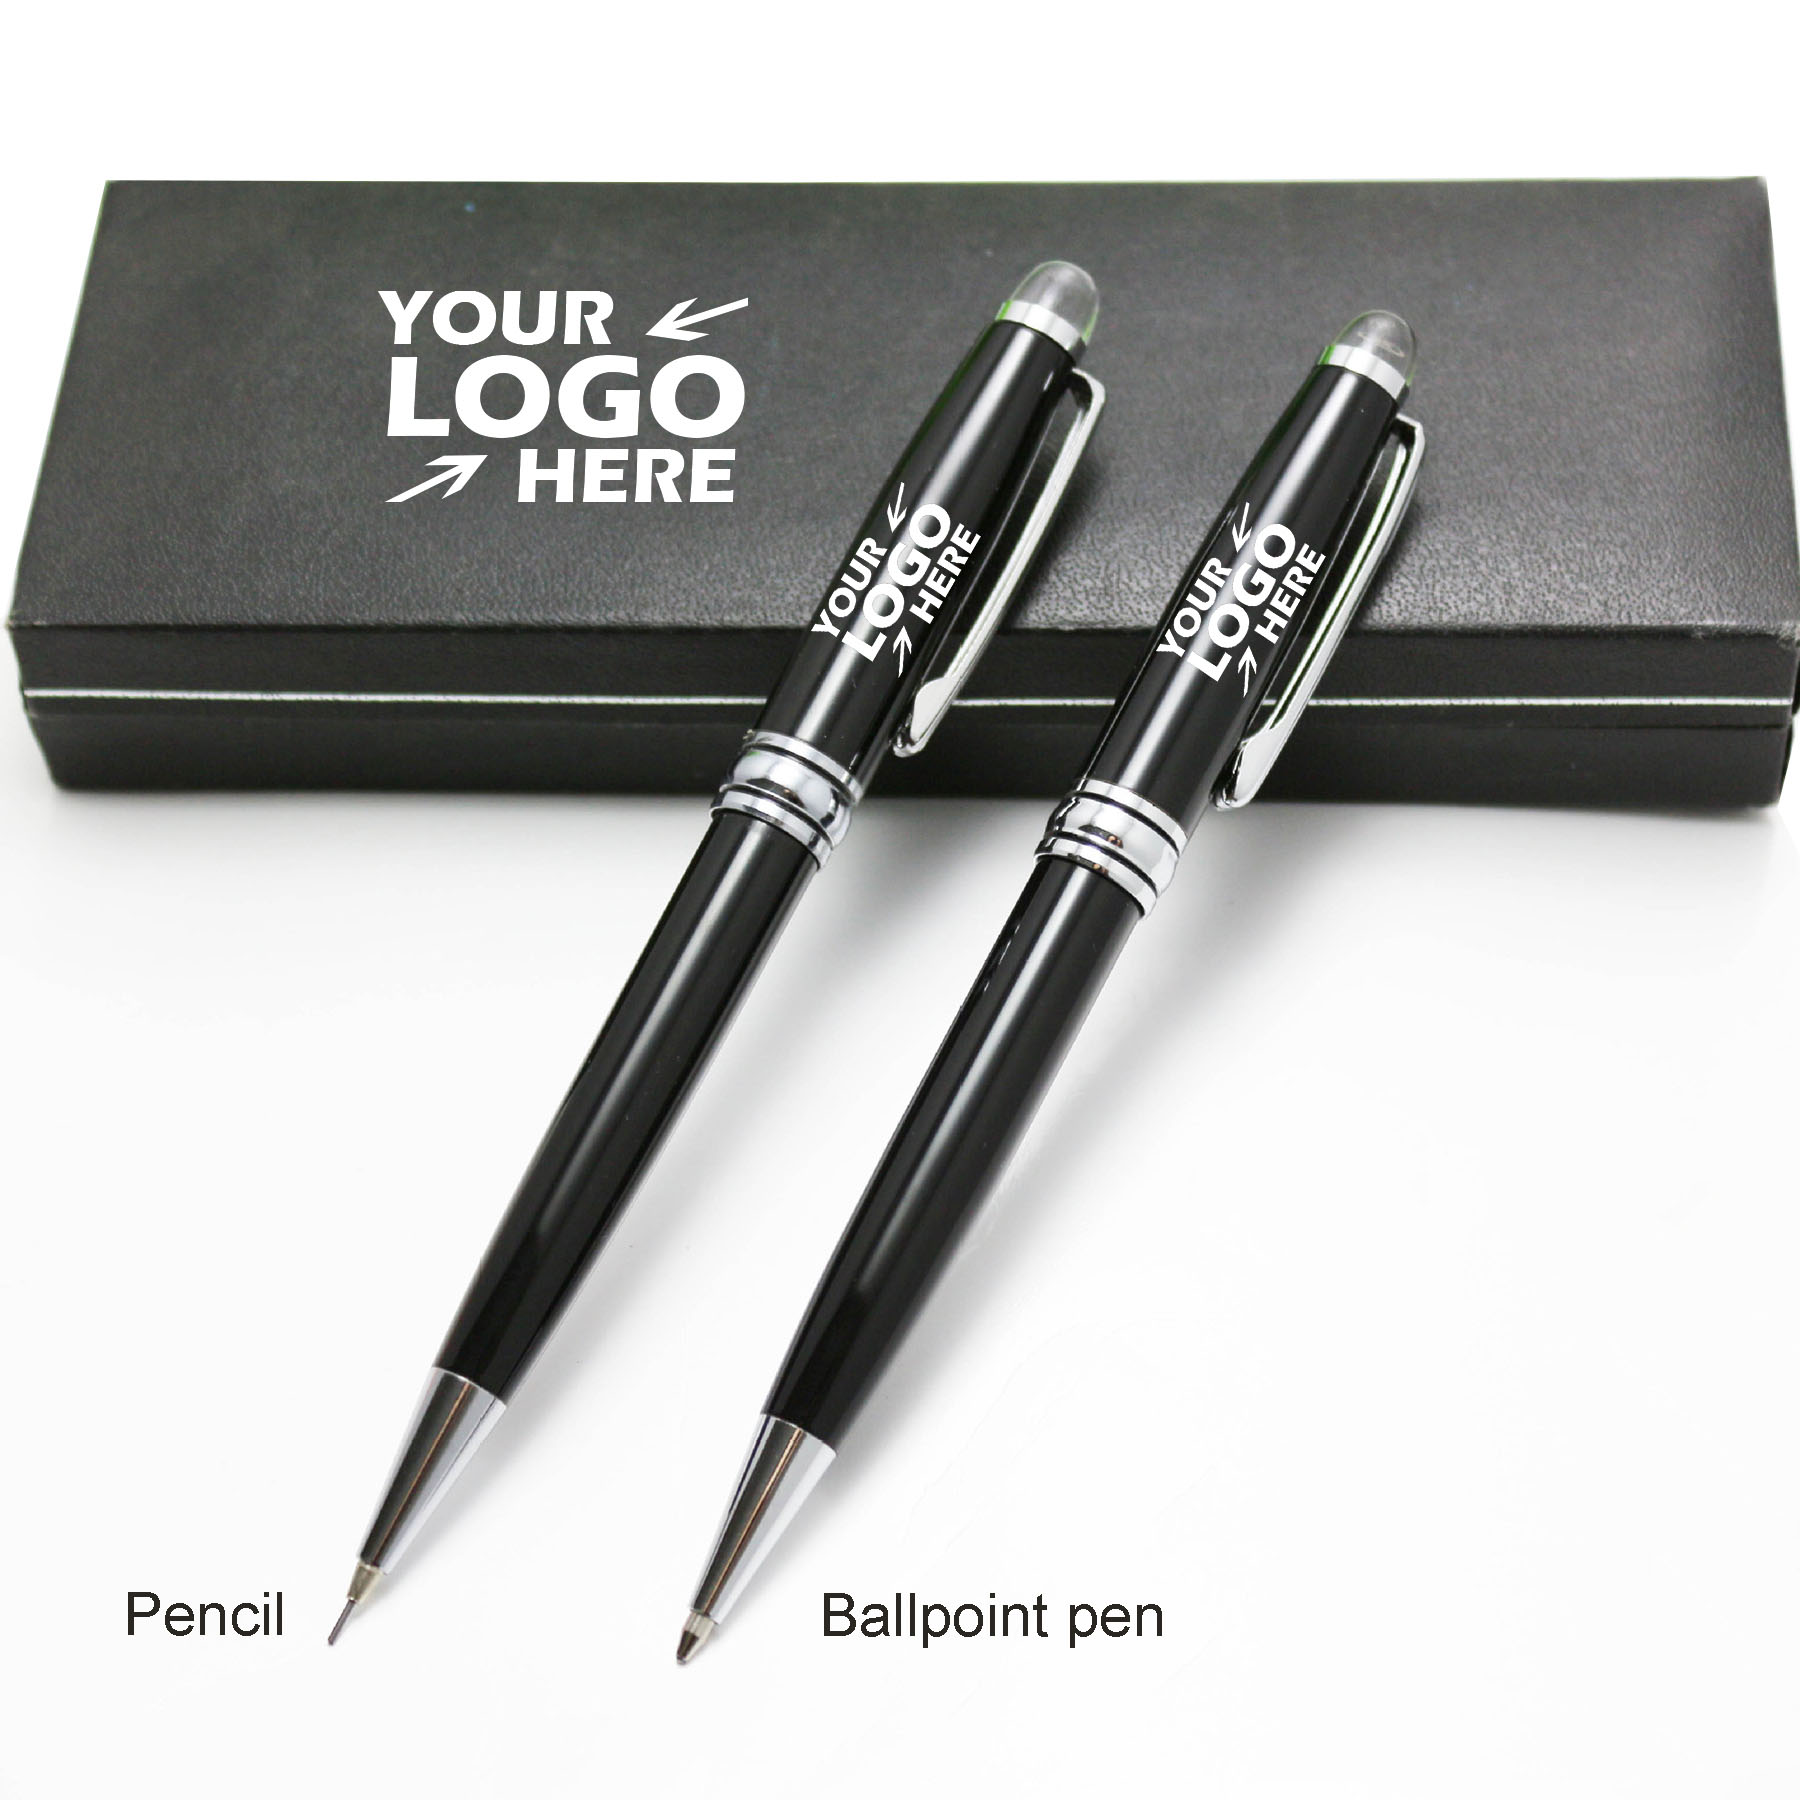 GL-SUH1017 Pen and Pencil Set with Gift Box